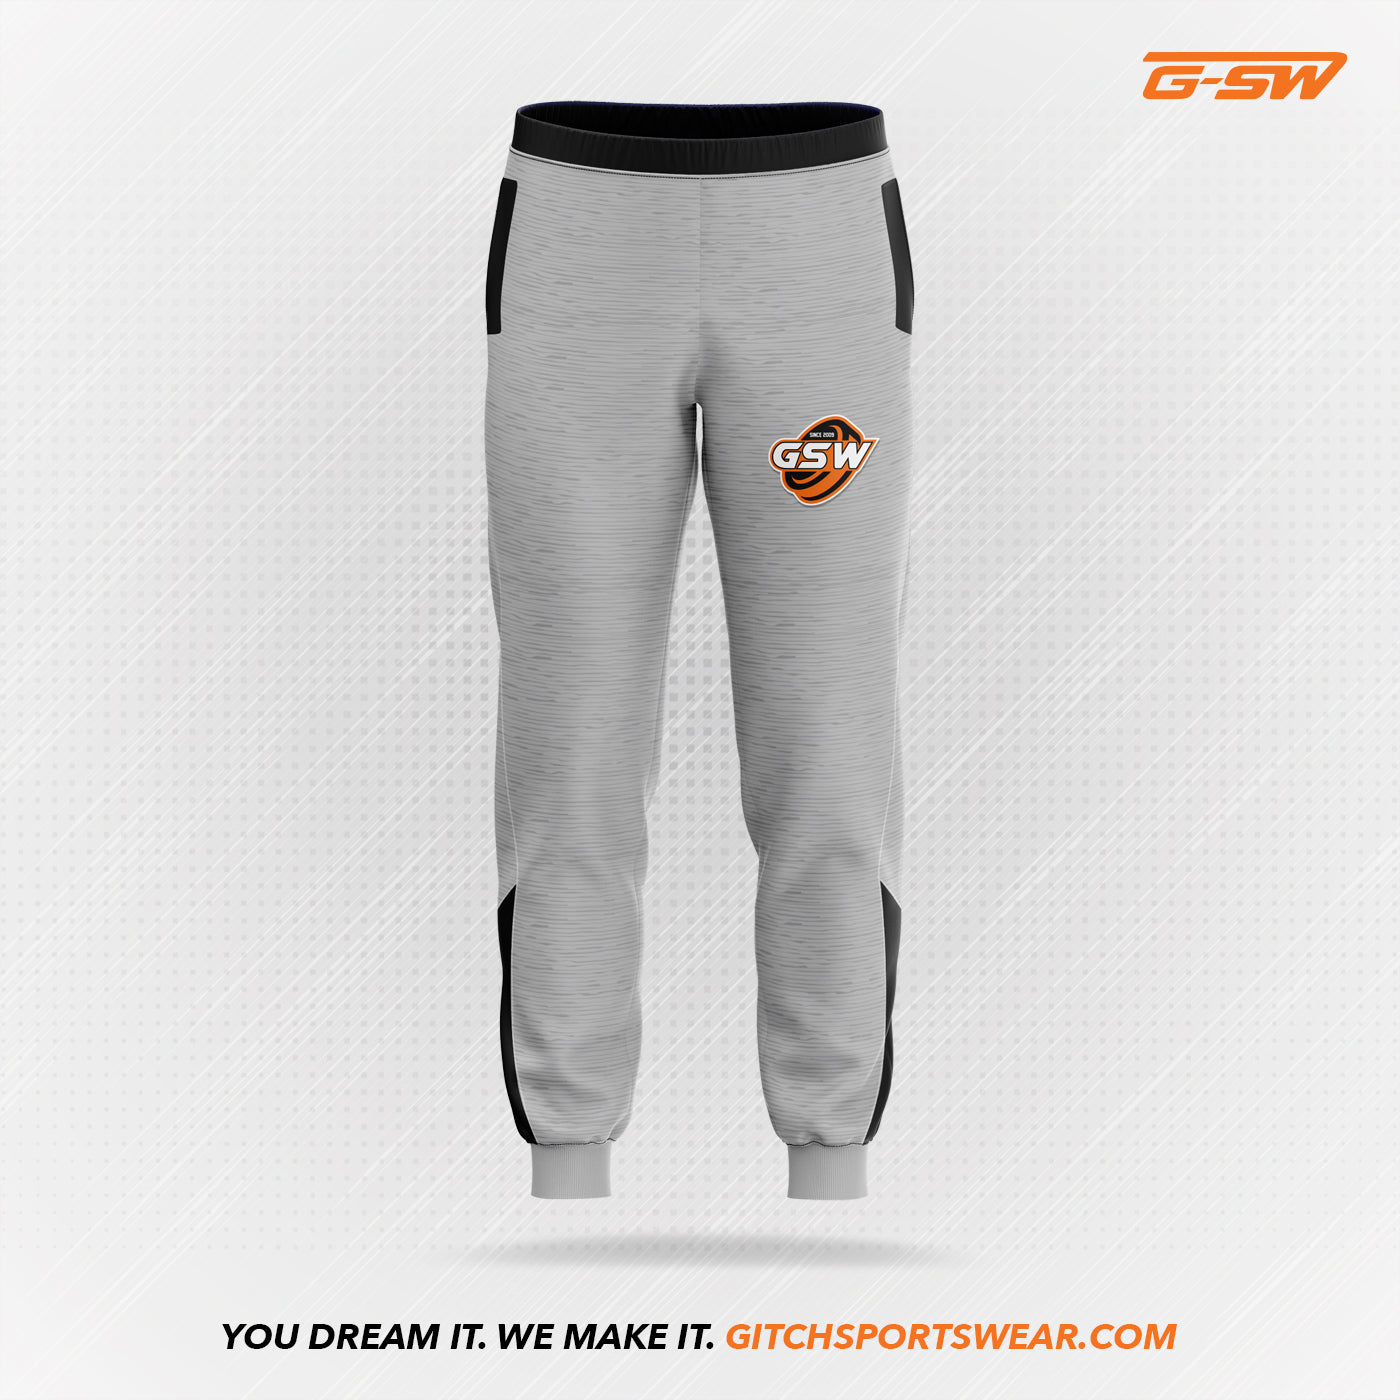 Custom Core Fleece Jogger, Personalized Sweatpants, Custom Team Pants,  Customize Sweatpants, Unique Design. Gift for Him and Her, PC78J 